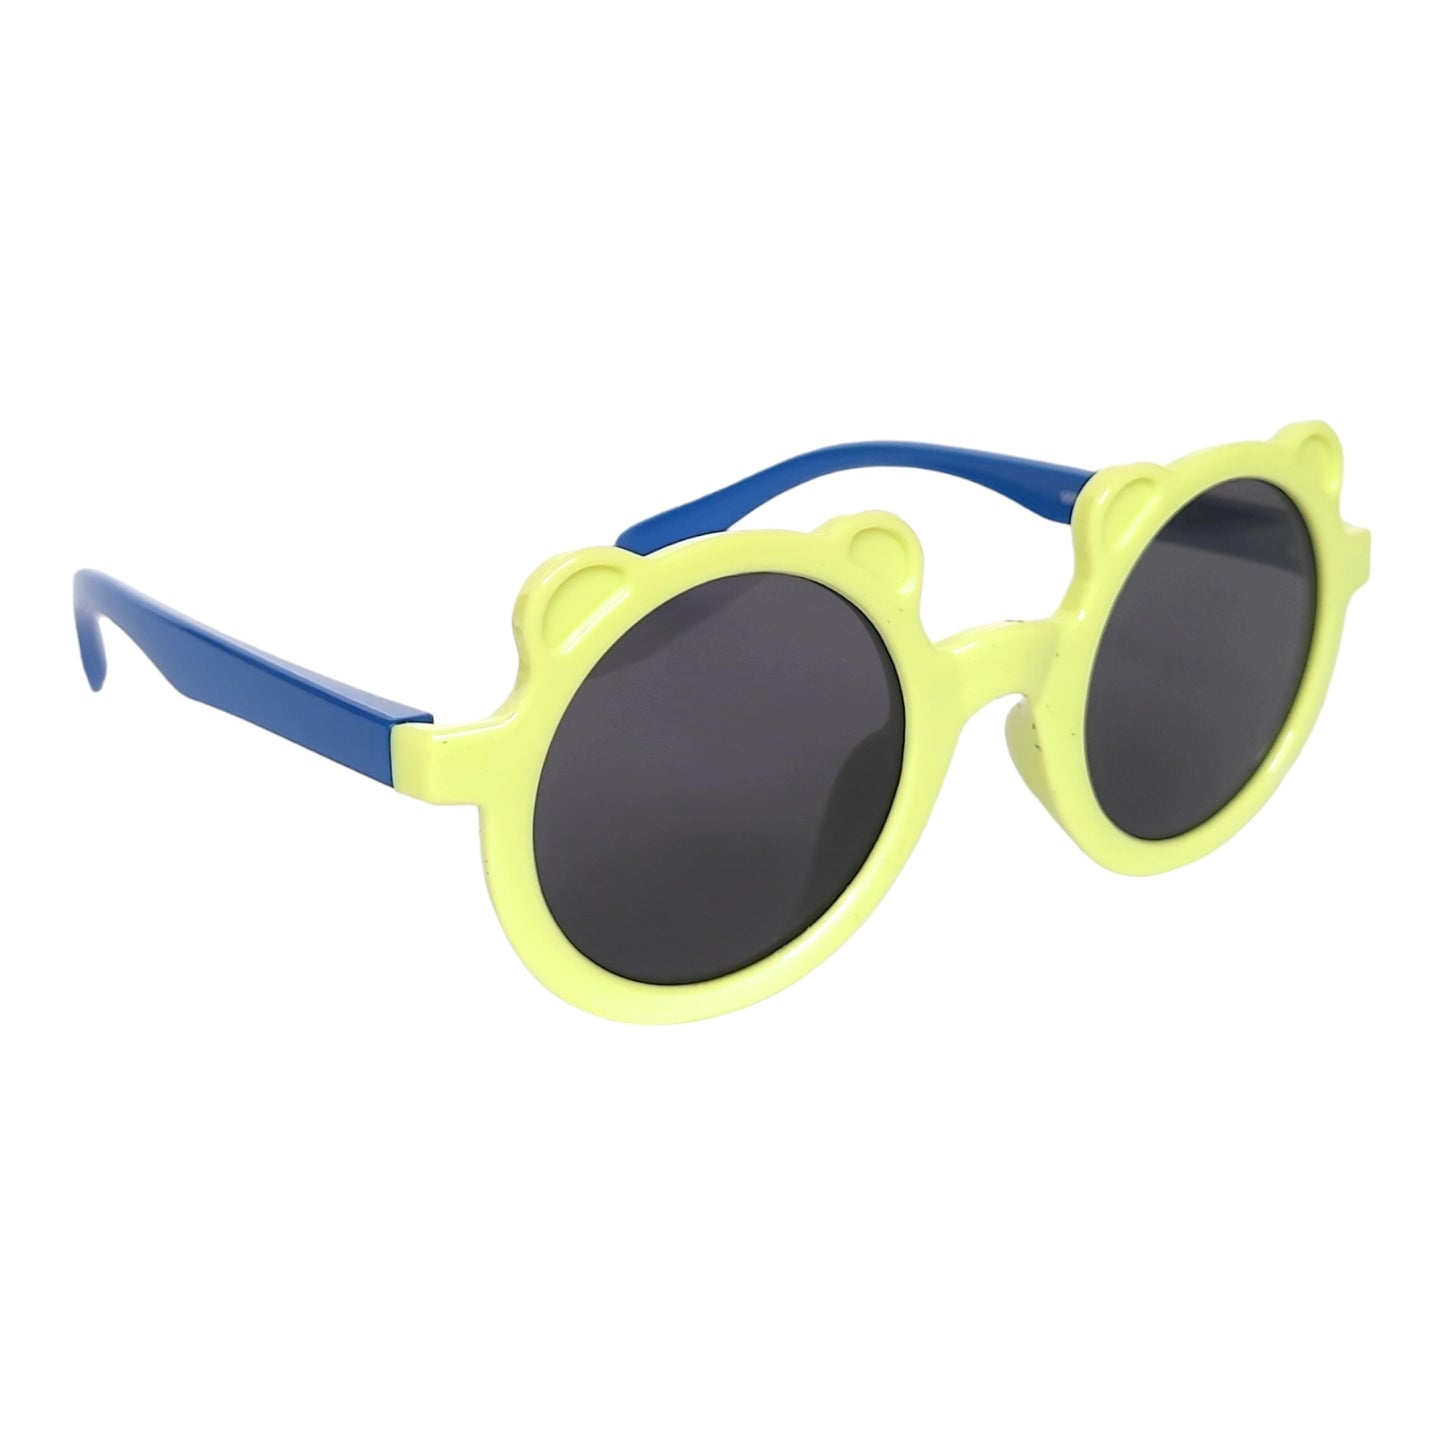 Kids polarized sunglasses for Kids Girls and Boys ( 3yrs to 8yrs ) – affaires-9005-Yellow